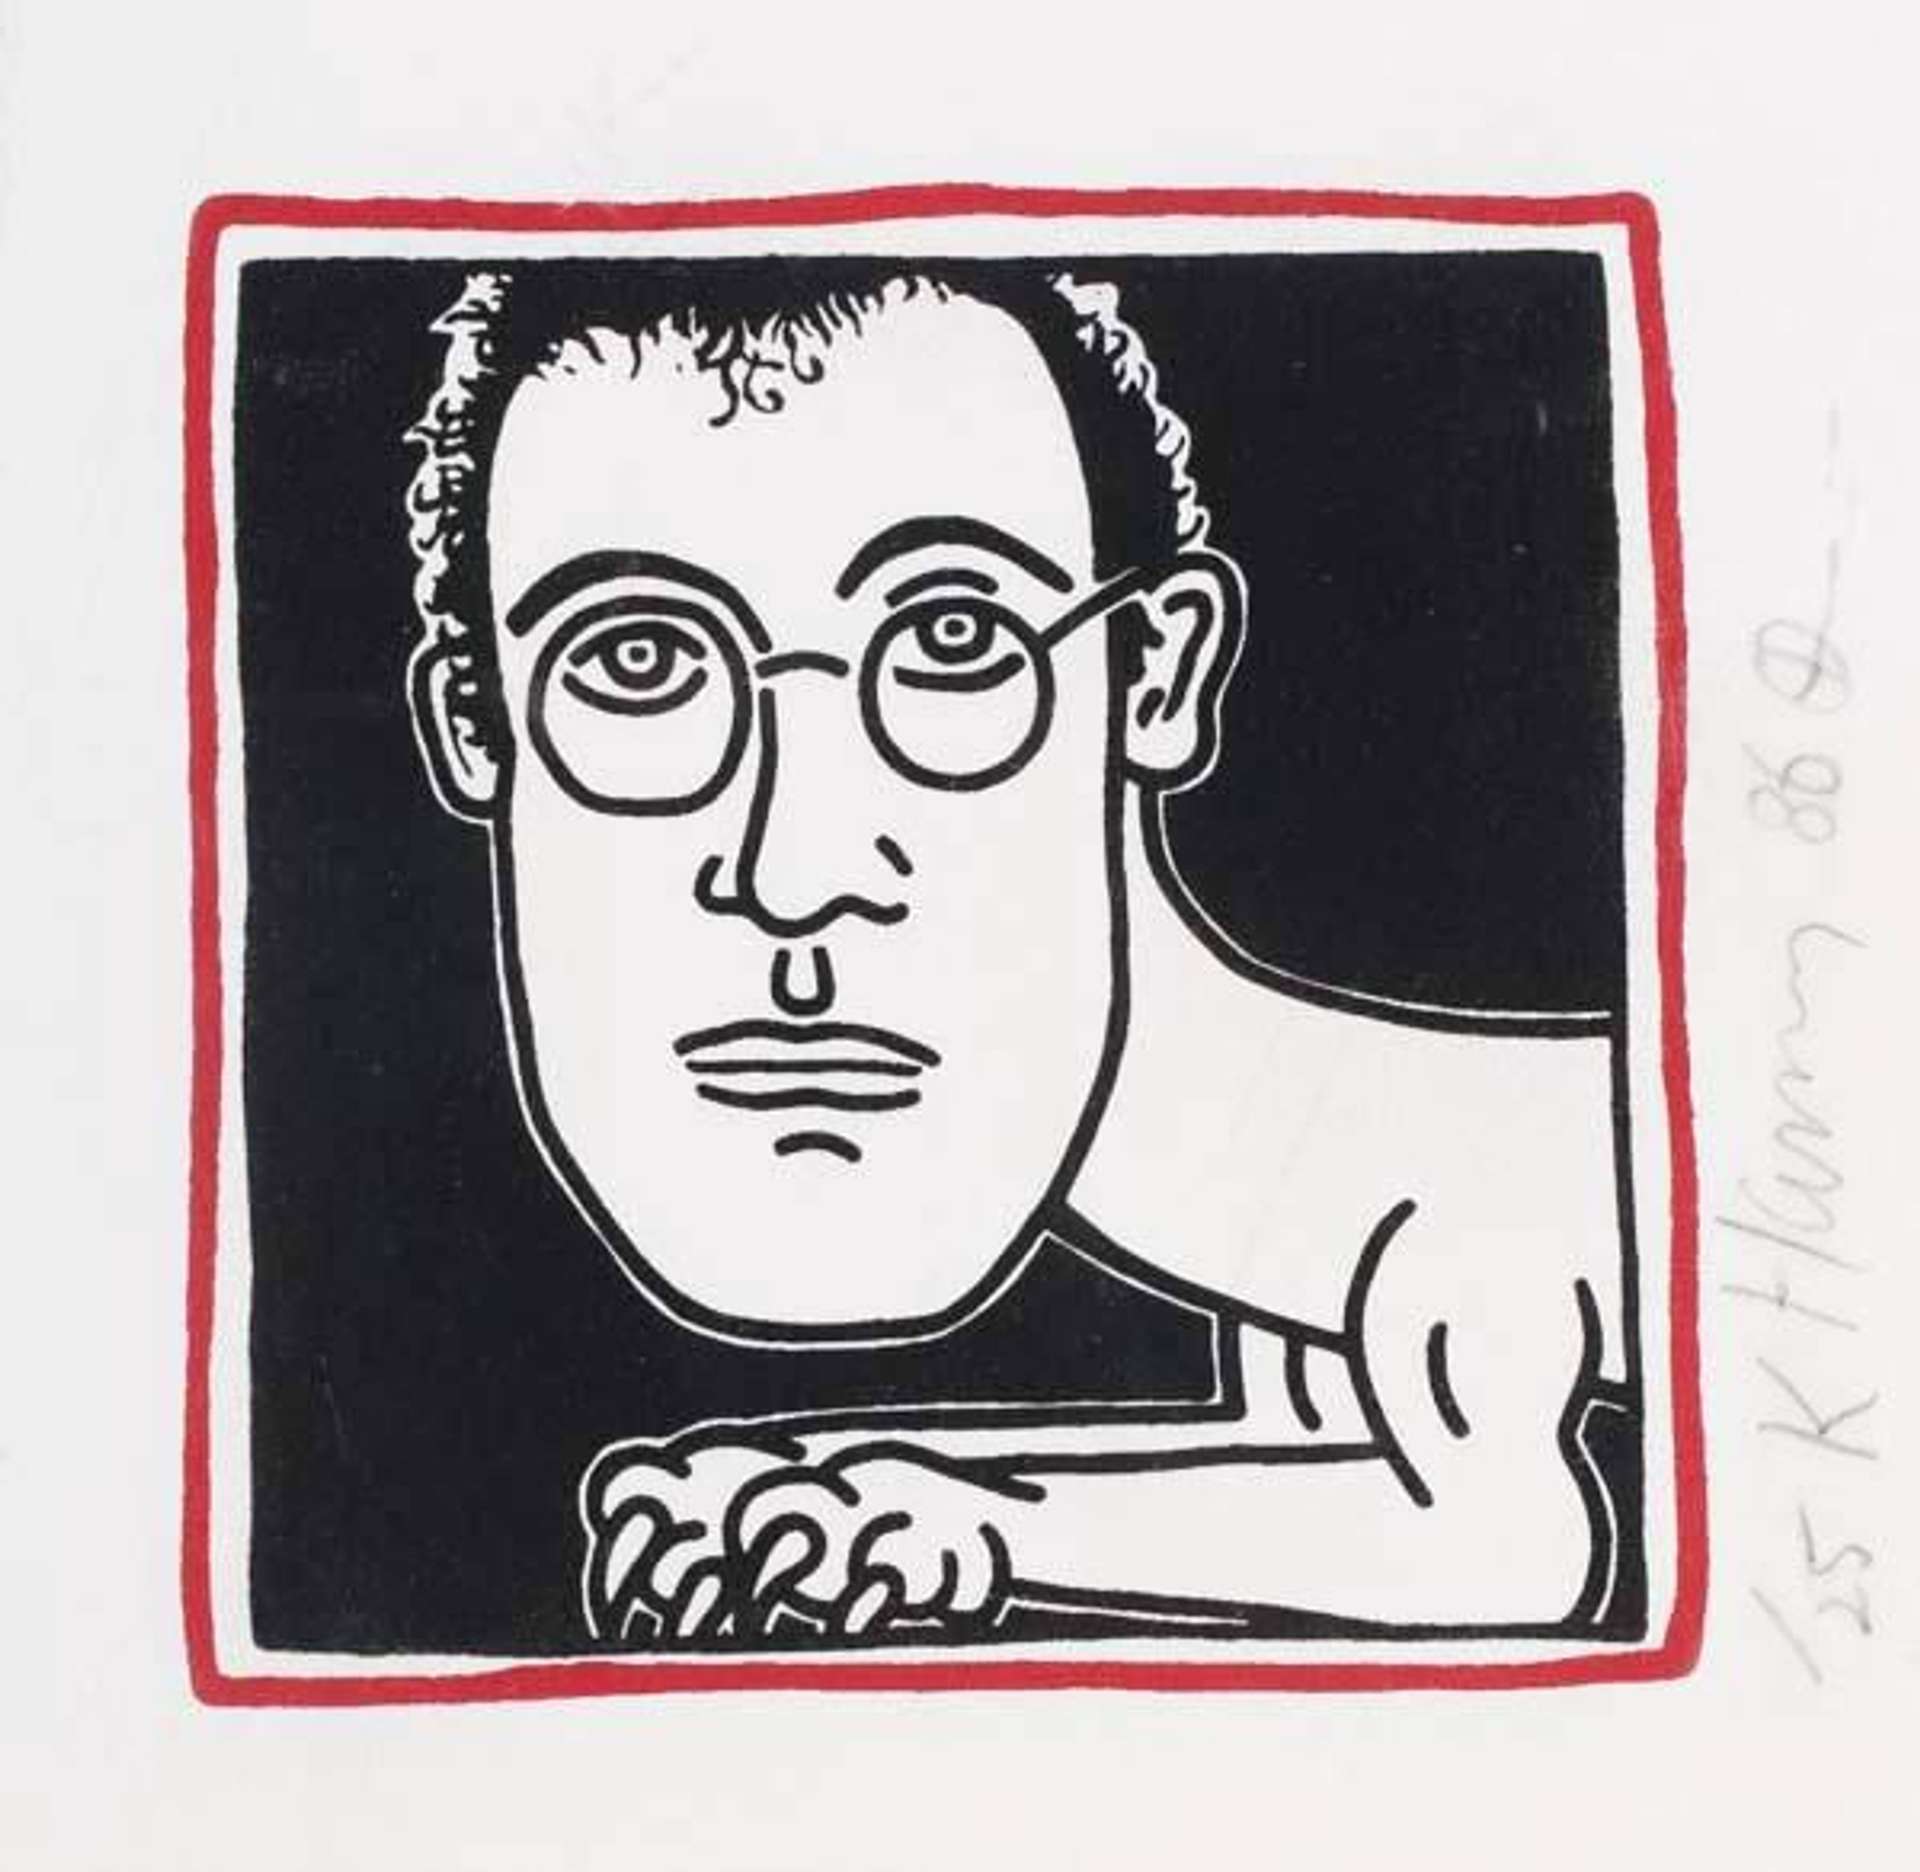 This print shows a surreal depiction of the artist in his characteristic linear style. Haring’s face forms the central focus of the image, but it is unusual that this portrait shows the artist’s head attached to the body of an animal with sharp claws. The print is done in black, white and red.